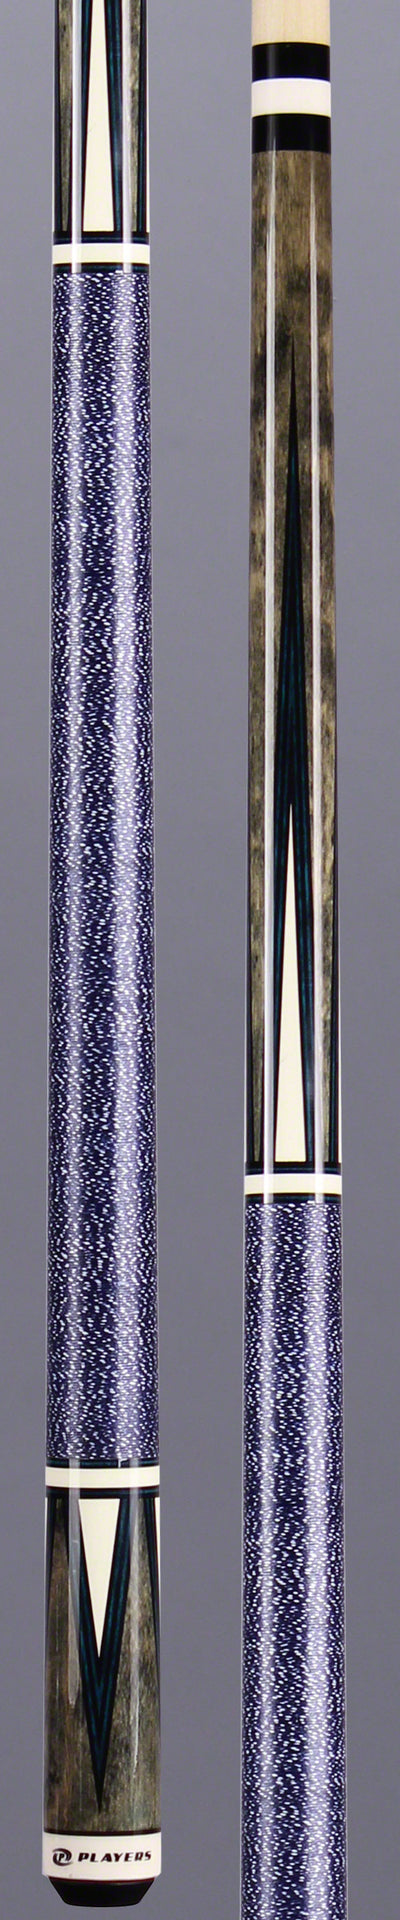 Players C-810 Grey Stained 4 Point Pool Cue